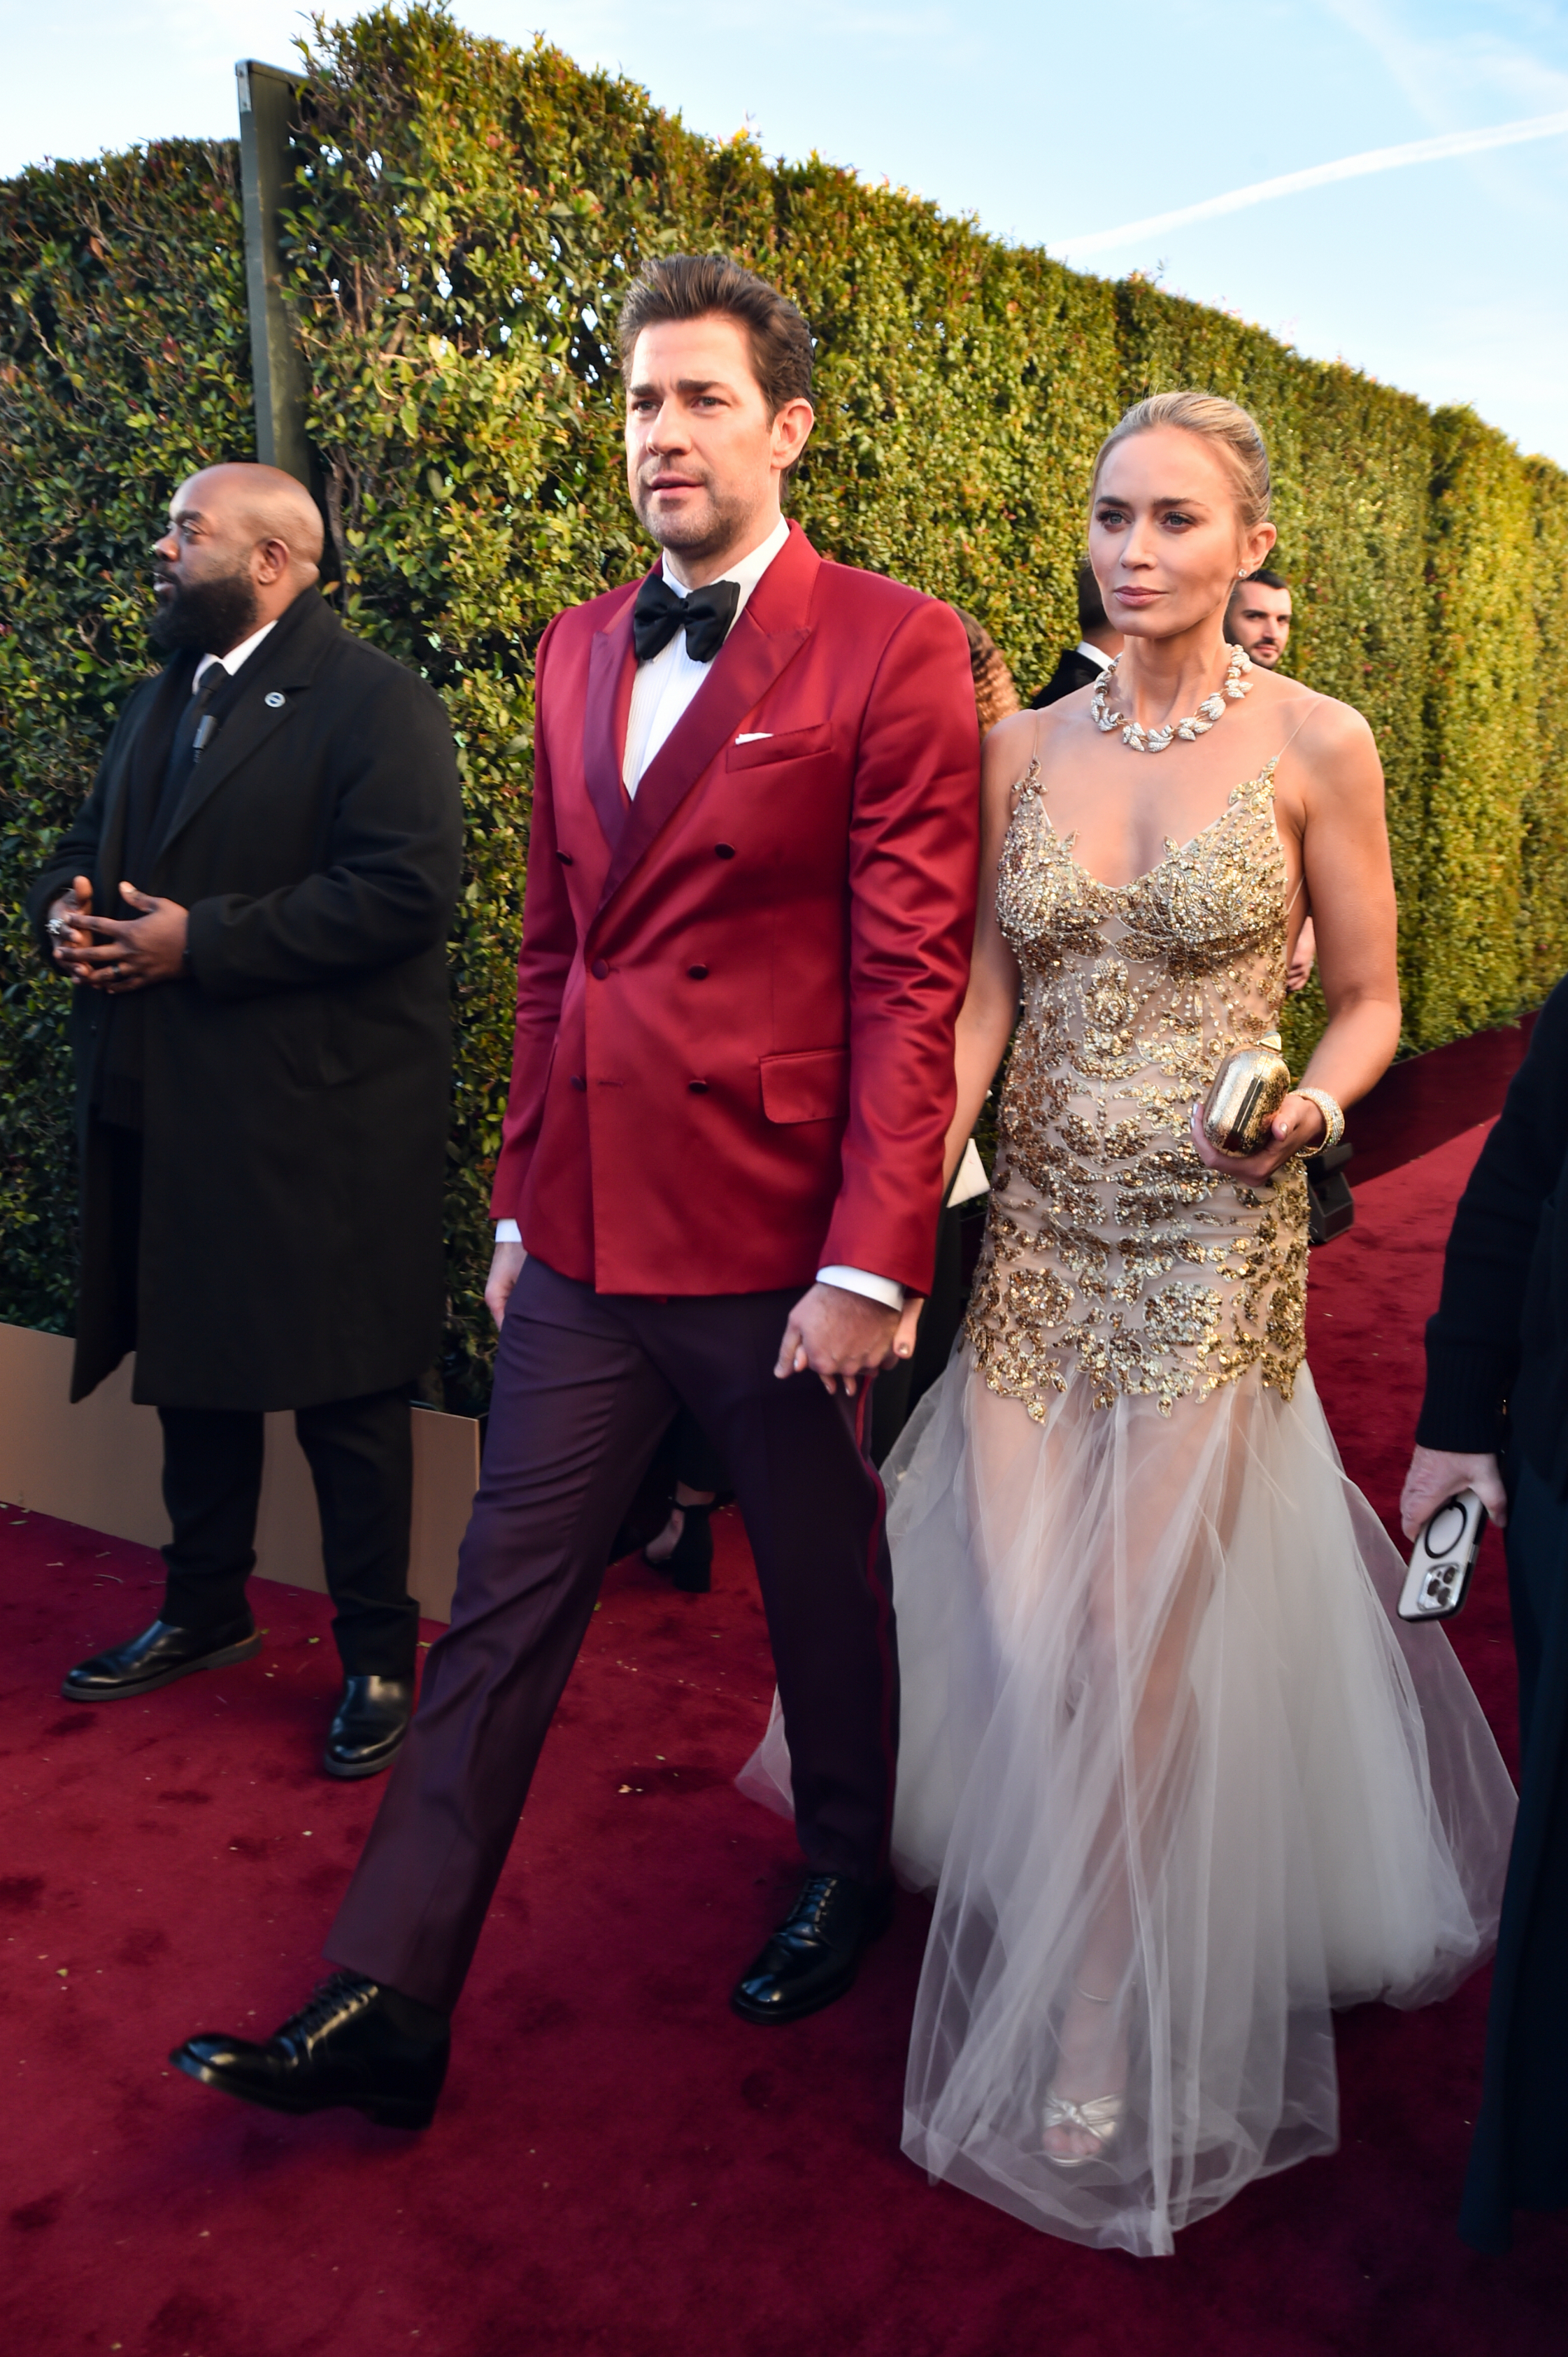 john and emily holding hands as they walk the red carpet